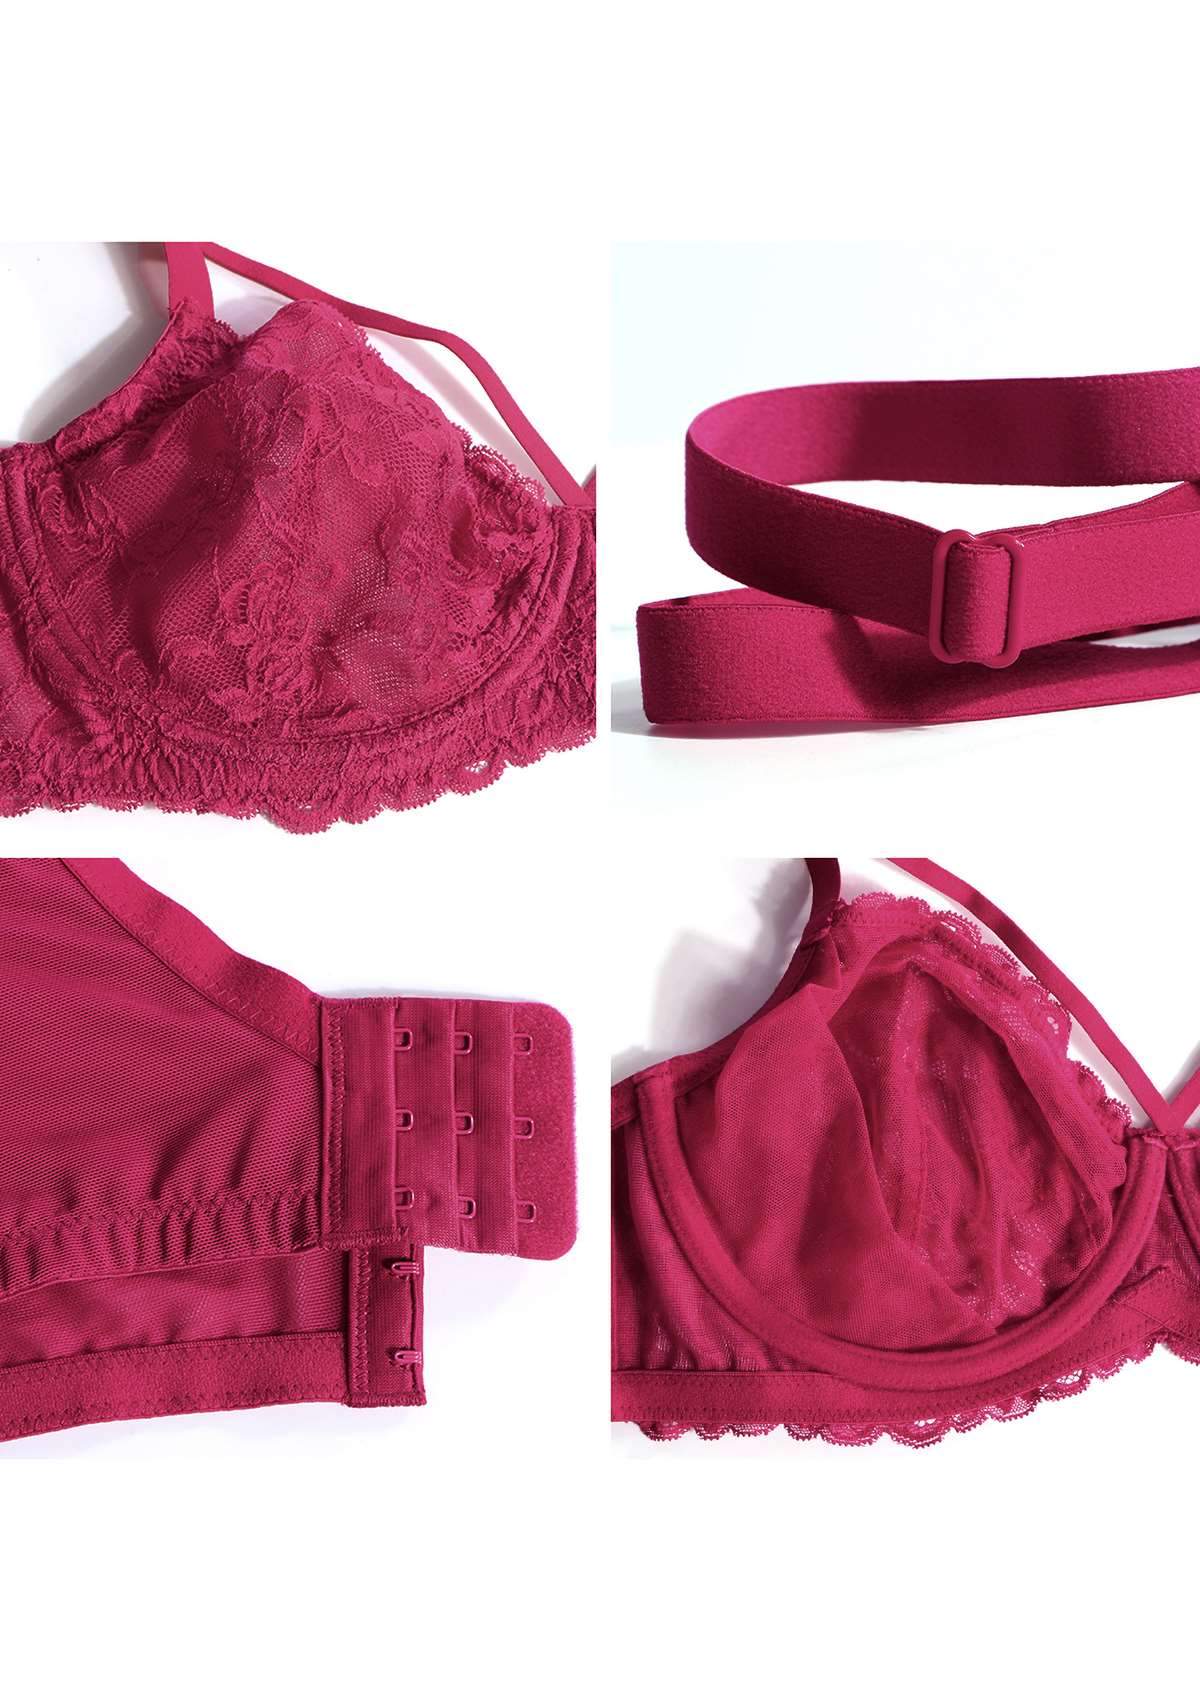 HSIA Pretty In Petals Sexy Lace Bra: Full Coverage Back Smoothing Bra - Red / 38 / I